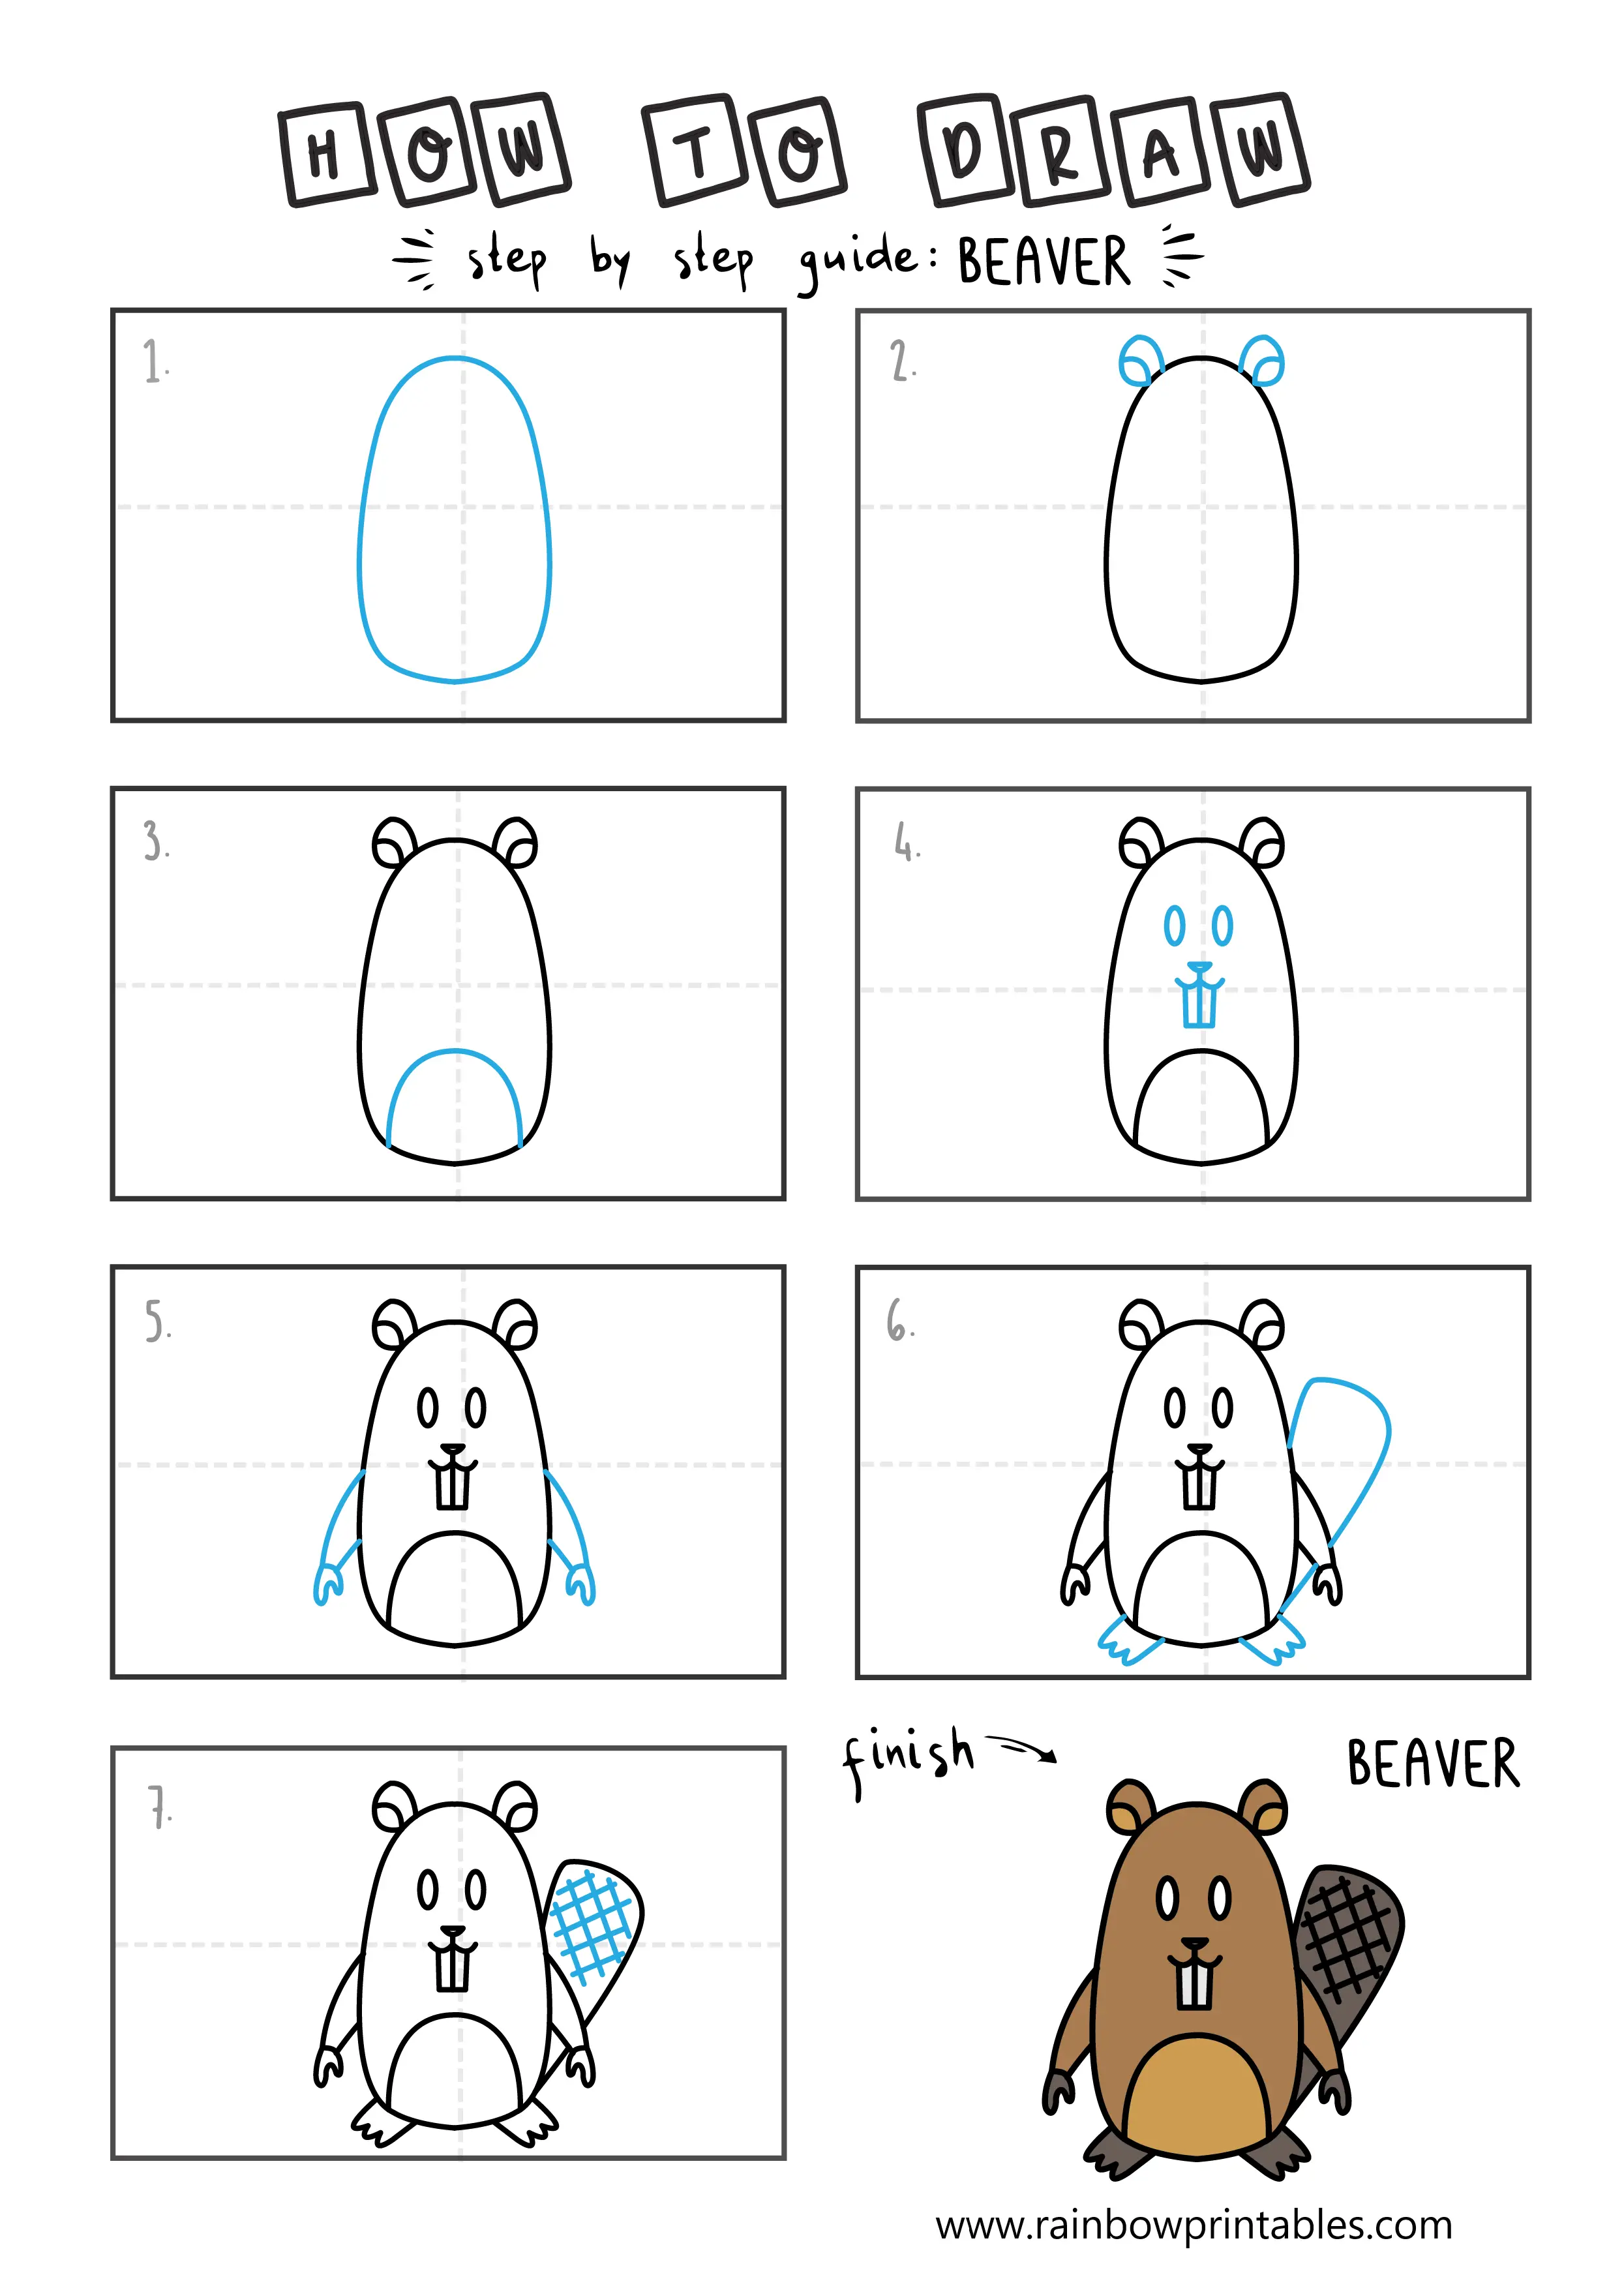 How To Draw a Beaver Easy Step By Step For Kids Illustration Art Ideas